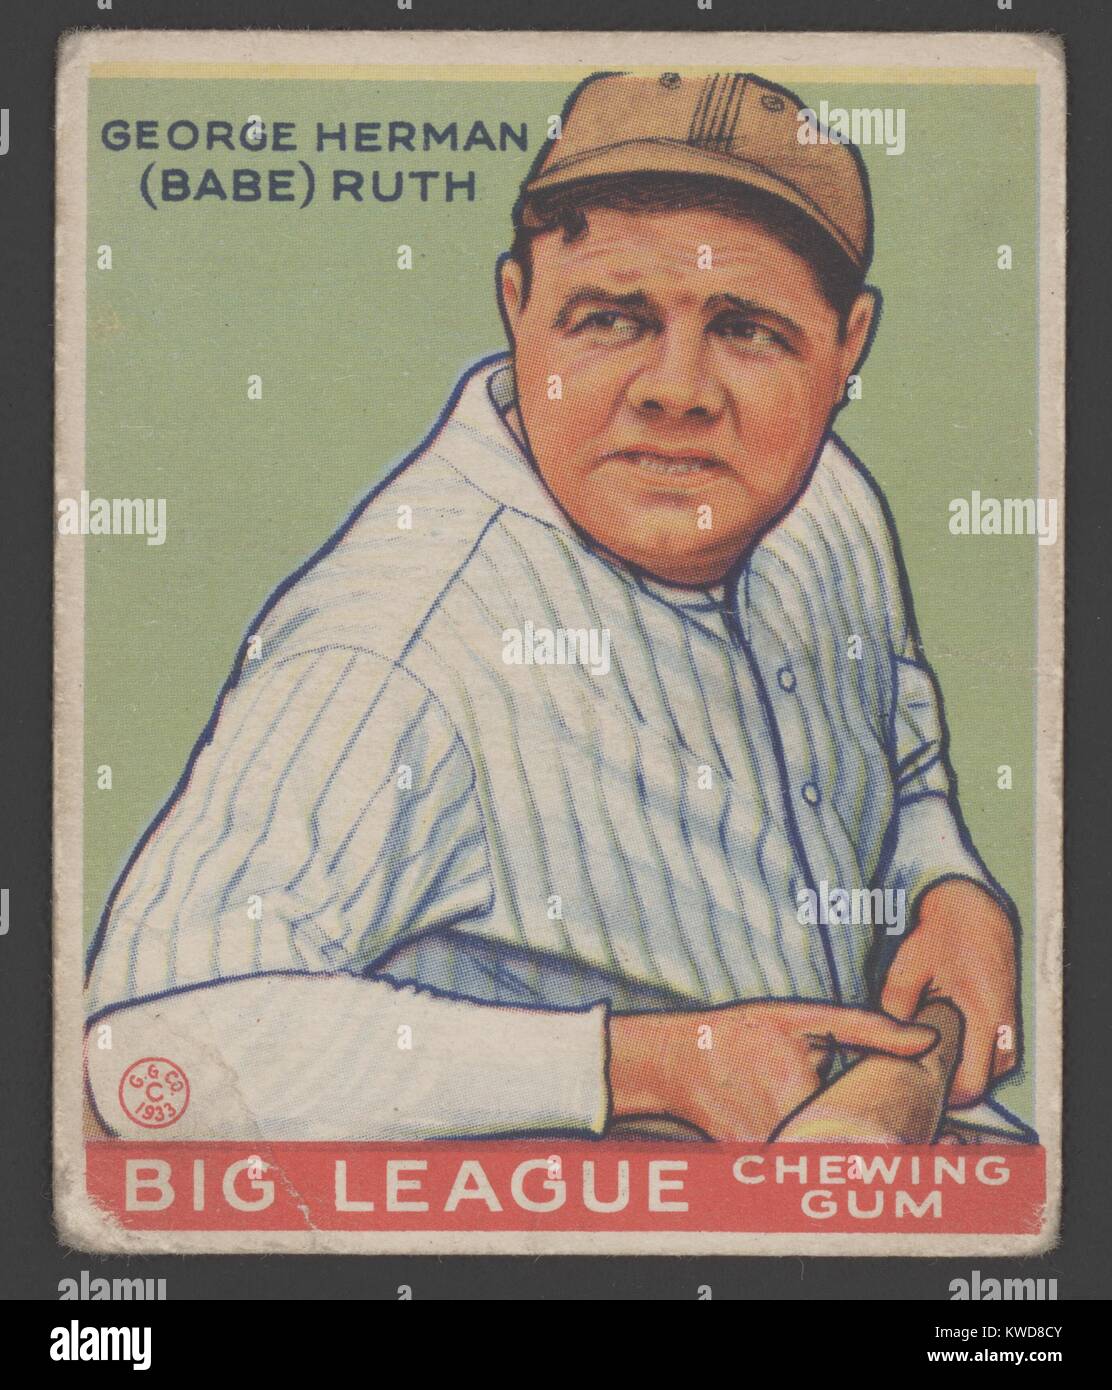 Babe Ruth 1933 baseball card by Big League Chewing Gum. (BSLOC 2015 17 31) Stock Photo